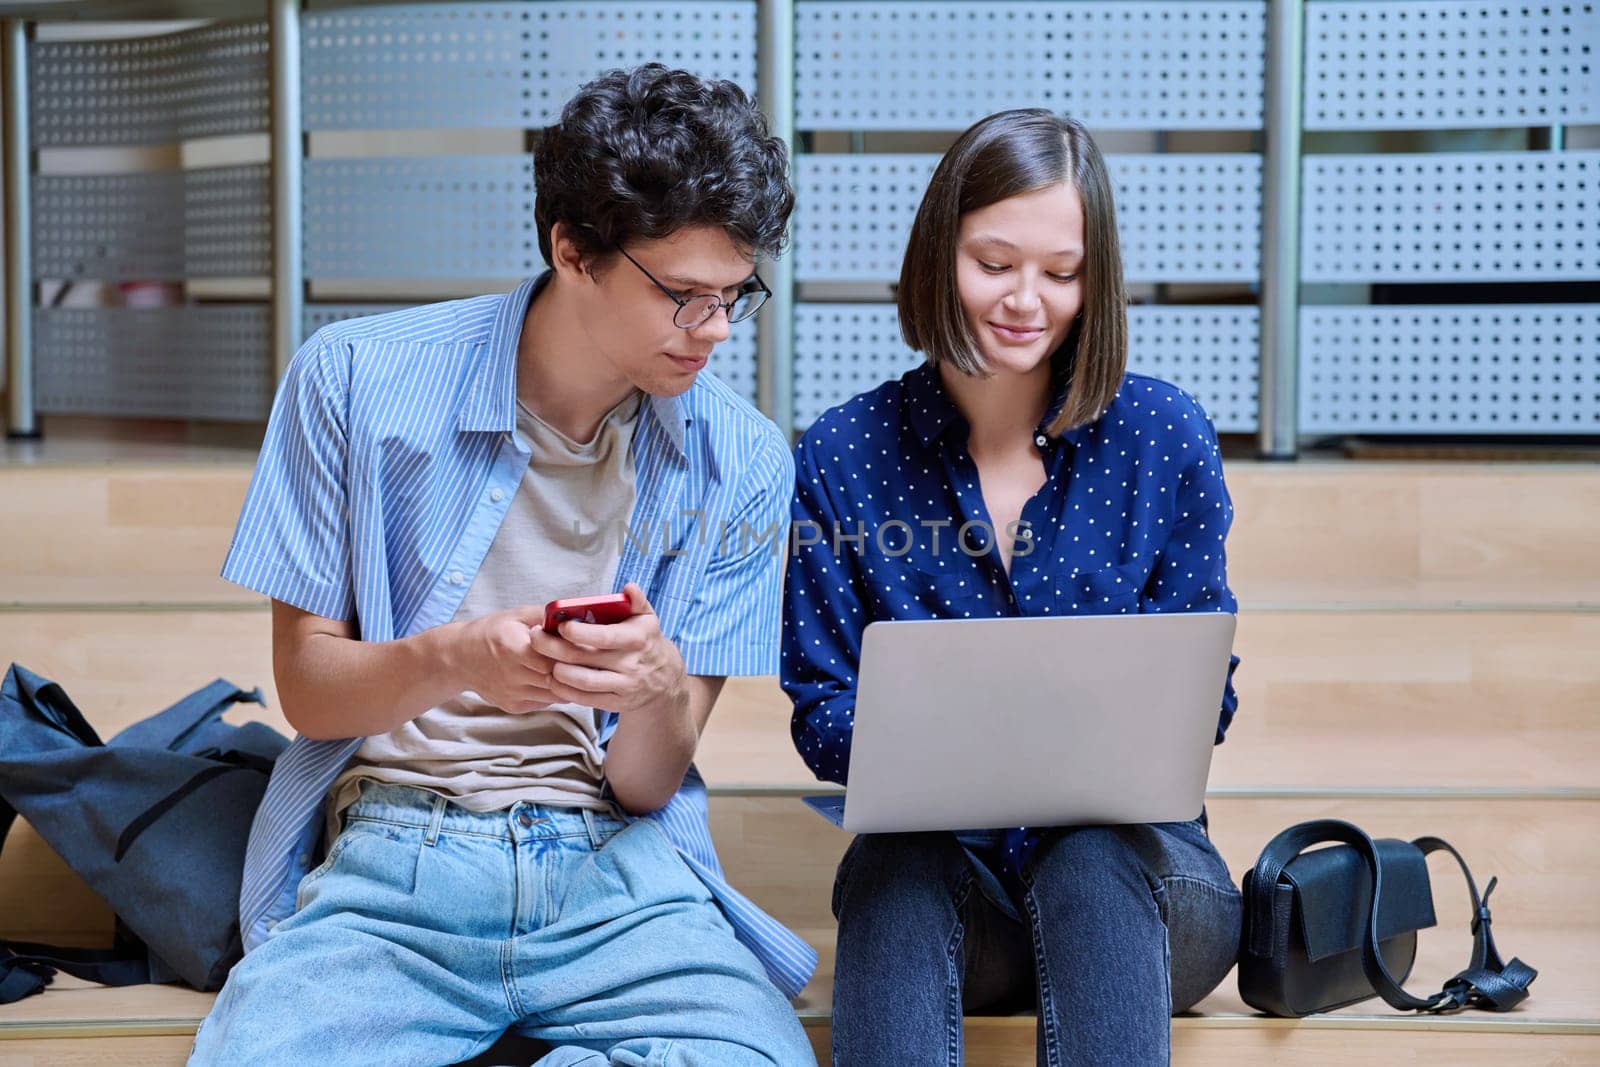 Friends classmates college students guy and girl with smartphone laptop inside educational building. Youth, lifestyle, technology, mobile applications for learning leisure communication